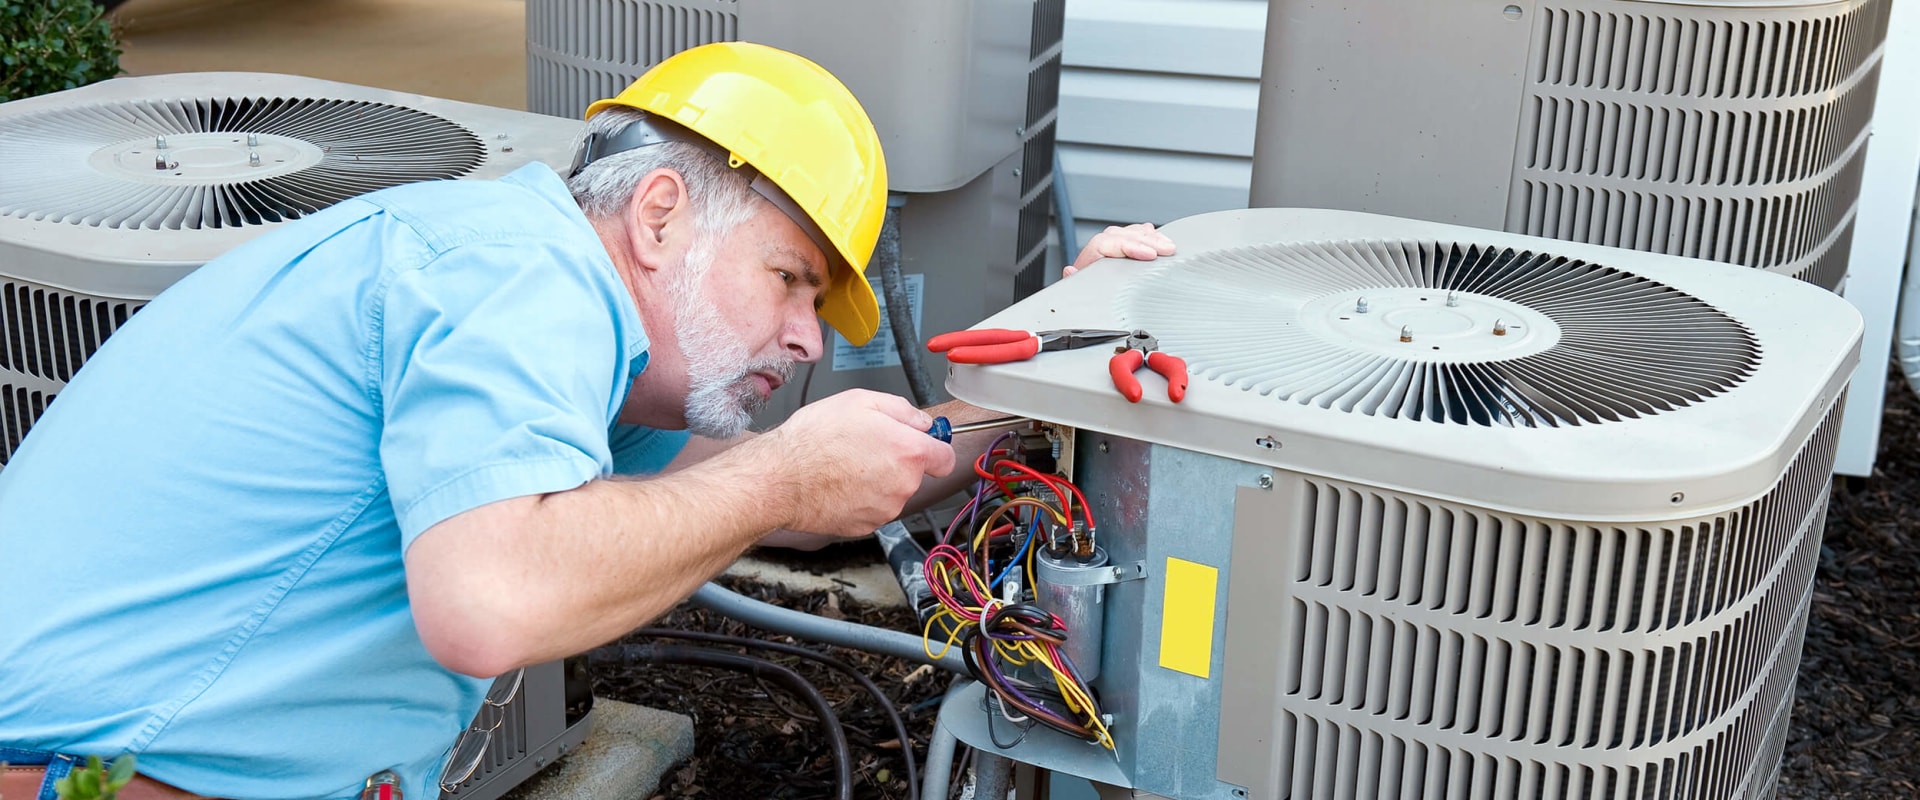 Air Duct Maintenance for HVAC Systems in Coral Springs, FL: Get Professional Help Now